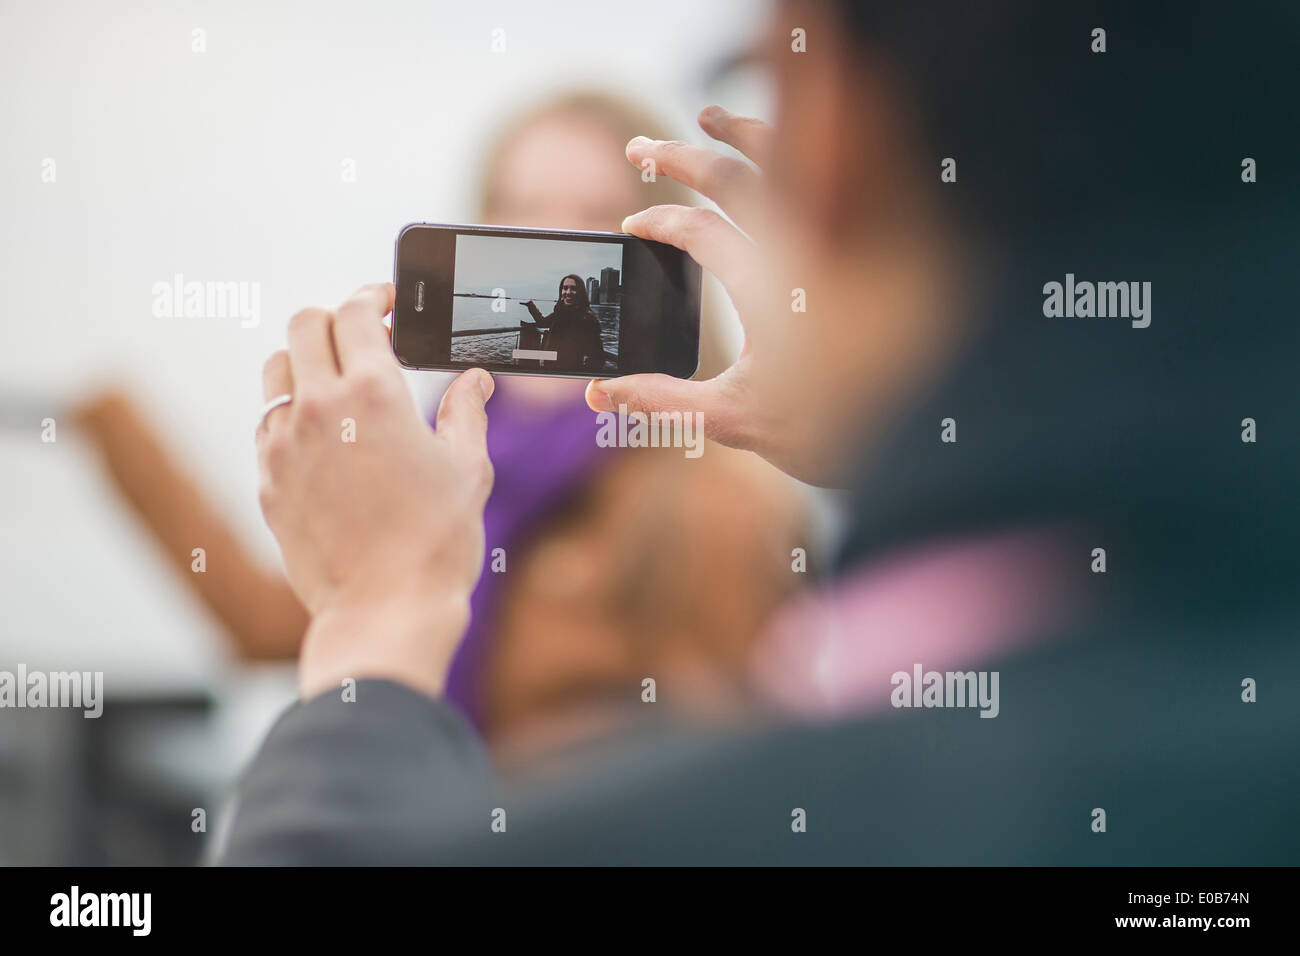 Close up of young man photographing girlfriend on camera phone Stock Photo